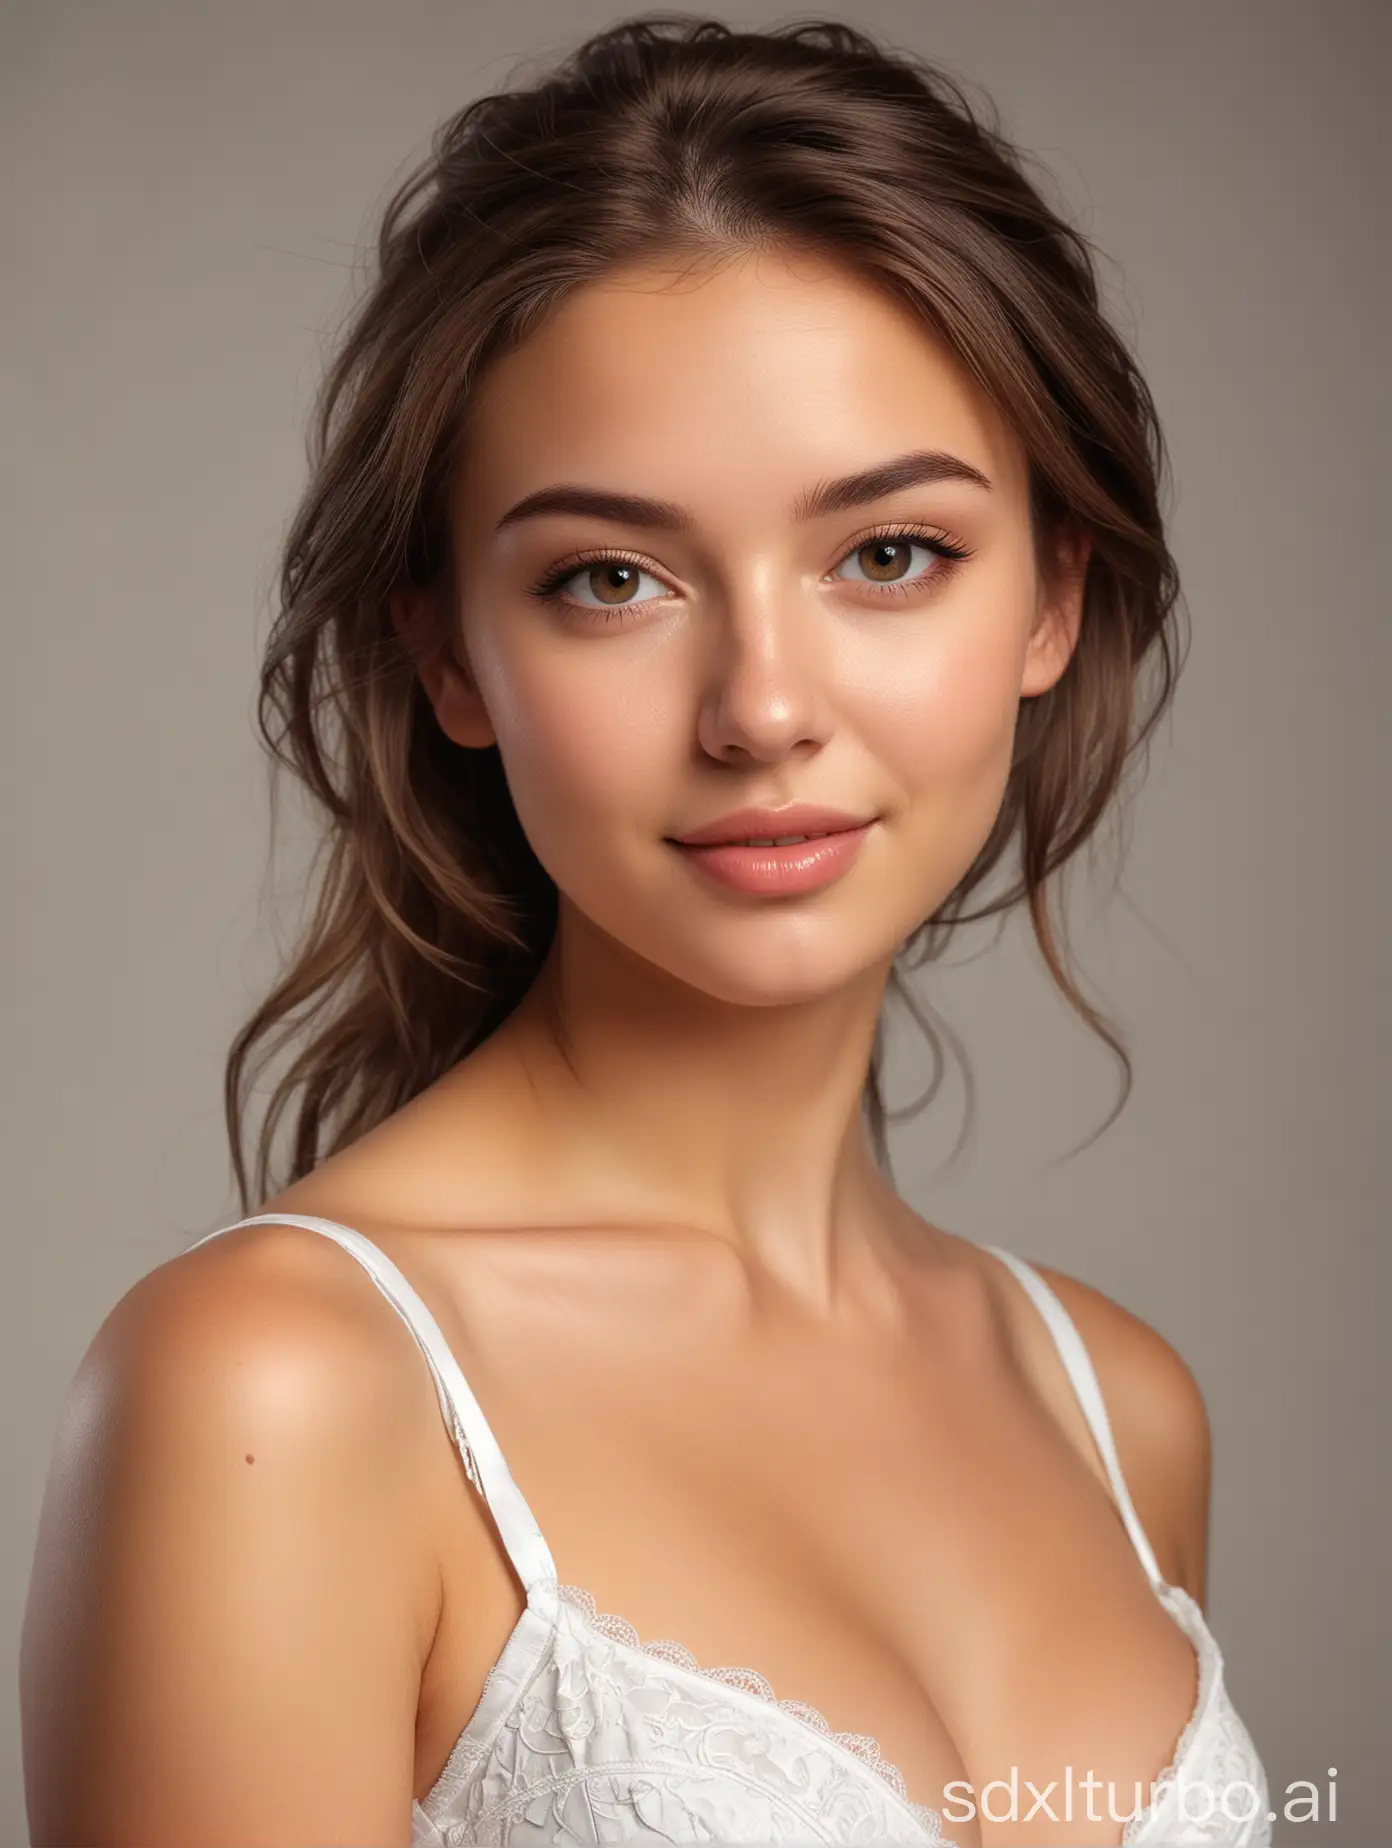 a beautiful young woman posing for a picture, a picture, by Adam Marczyński, shutterstock, digital art, natural realistic render, beautiful well rounded face, white bra, soft portrait shot 8 k, woman in dress, professional closeup photo, 18 years old, slight cute smile, big cheekbones, fair olive skin, light makeup, girl cute-fine-face